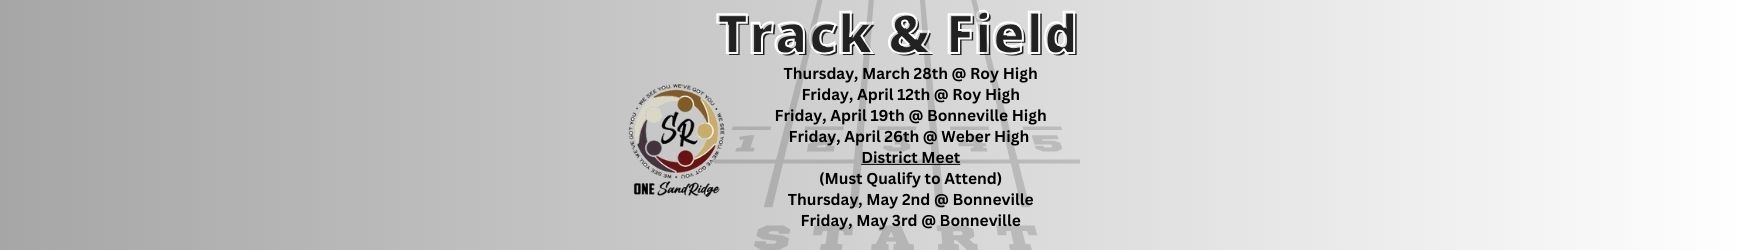 Track for Meets Click Link for Standings & Schedule